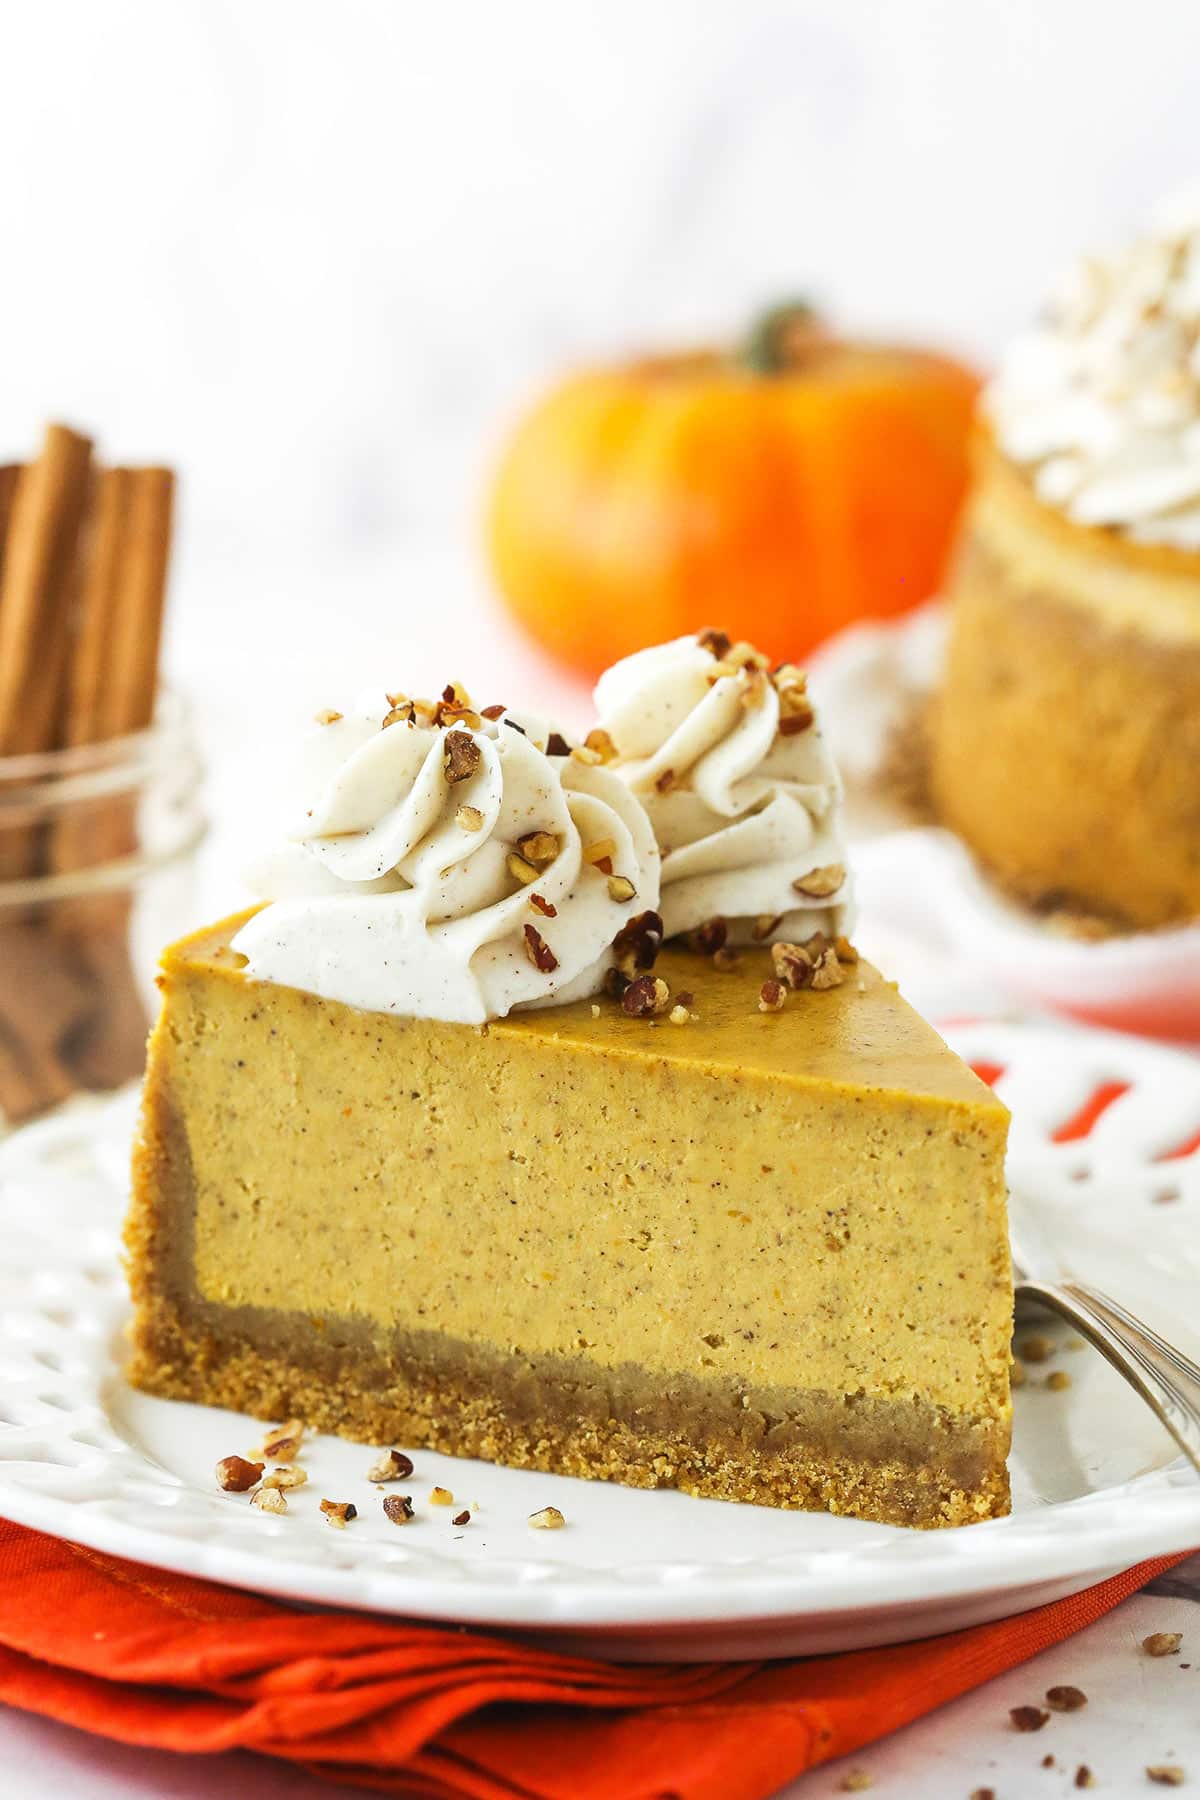 A slice of pumpkin cheesecake on a plate with a pumpkin and a jar of cinnamon sticks behind it